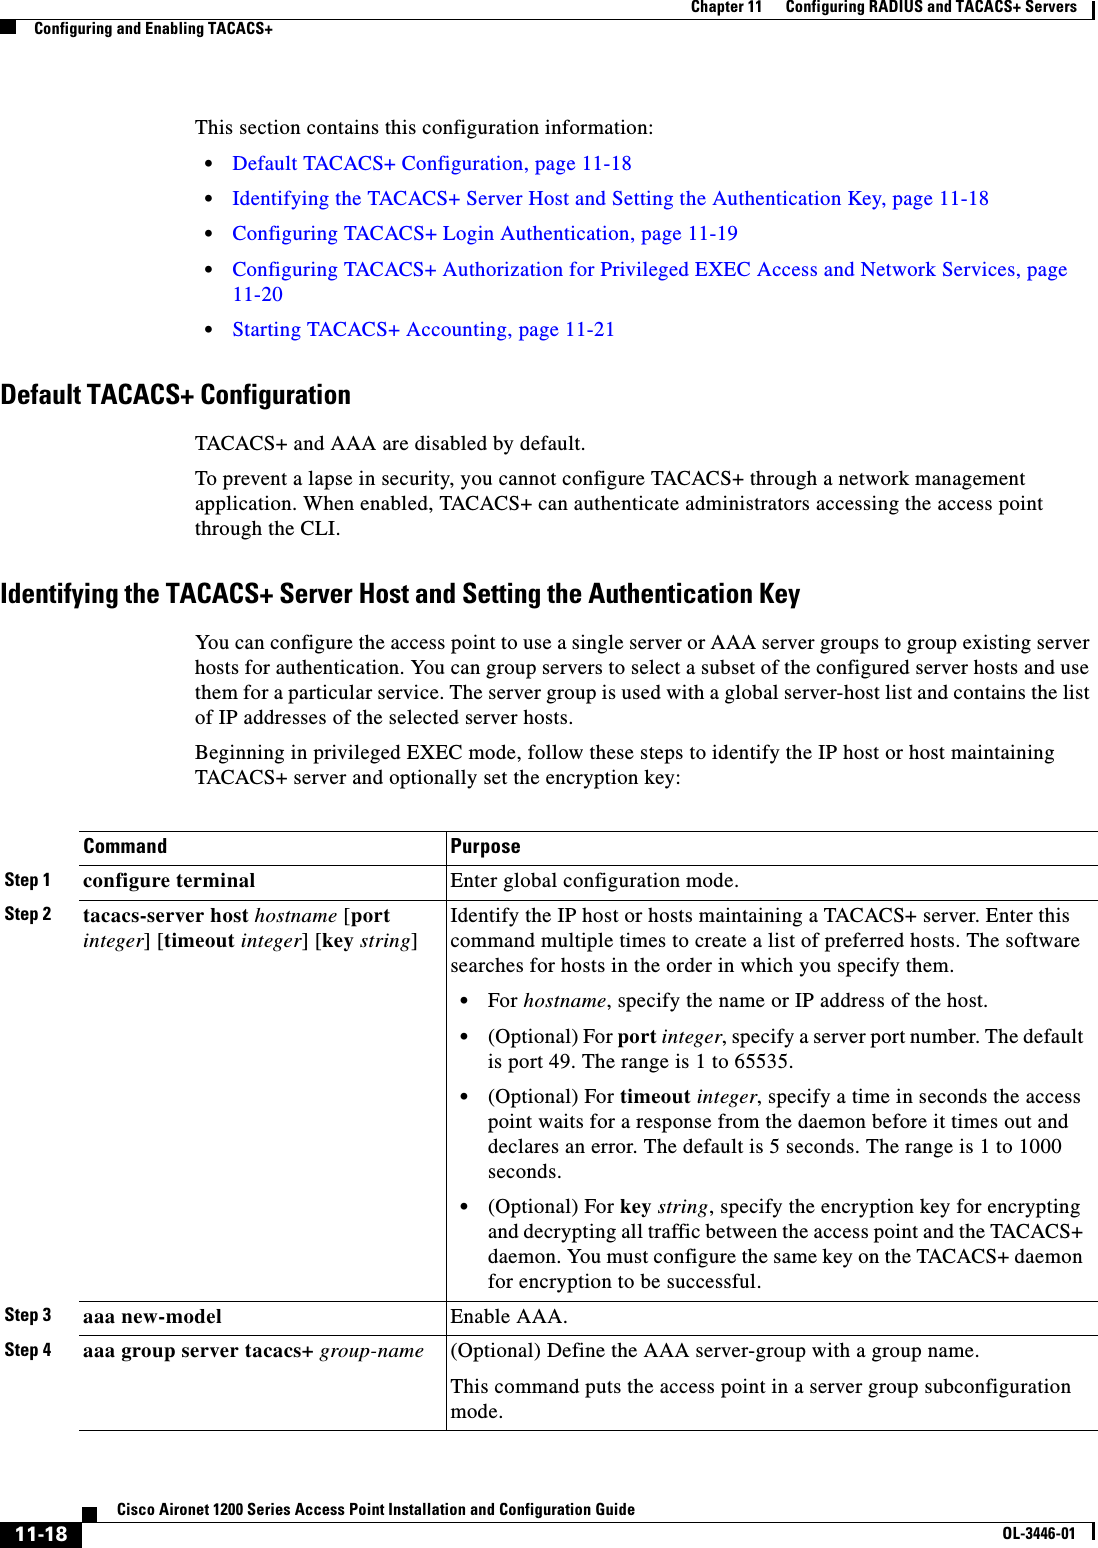 11-18Cisco Aironet 1200 Series Access Point Installation and Configuration GuideOL-3446-01Chapter 11      Configuring RADIUS and TACACS+ ServersConfiguring and Enabling TACACS+This section contains this configuration information:•Default TACACS+ Configuration, page 11-18•Identifying the TACACS+ Server Host and Setting the Authentication Key, page 11-18•Configuring TACACS+ Login Authentication, page 11-19•Configuring TACACS+ Authorization for Privileged EXEC Access and Network Services, page 11-20•Starting TACACS+ Accounting, page 11-21Default TACACS+ ConfigurationTACACS+ and AAA are disabled by default.To prevent a lapse in security, you cannot configure TACACS+ through a network management application. When enabled, TACACS+ can authenticate administrators accessing the access point through the CLI.Identifying the TACACS+ Server Host and Setting the Authentication KeyYou can configure the access point to use a single server or AAA server groups to group existing server hosts for authentication. You can group servers to select a subset of the configured server hosts and use them for a particular service. The server group is used with a global server-host list and contains the list of IP addresses of the selected server hosts.Beginning in privileged EXEC mode, follow these steps to identify the IP host or host maintaining TACACS+ server and optionally set the encryption key:Command PurposeStep 1 configure terminal Enter global configuration mode.Step 2 tacacs-server host hostname [port integer] [timeout integer] [key string]Identify the IP host or hosts maintaining a TACACS+ server. Enter this command multiple times to create a list of preferred hosts. The software searches for hosts in the order in which you specify them.•For hostname, specify the name or IP address of the host.•(Optional) For port integer, specify a server port number. The default is port 49. The range is 1 to 65535.•(Optional) For timeout integer, specify a time in seconds the access point waits for a response from the daemon before it times out and declares an error. The default is 5 seconds. The range is 1 to 1000 seconds.•(Optional) For key string, specify the encryption key for encrypting and decrypting all traffic between the access point and the TACACS+ daemon. You must configure the same key on the TACACS+ daemon for encryption to be successful.Step 3 aaa new-model Enable AAA.Step 4 aaa group server tacacs+ group-name (Optional) Define the AAA server-group with a group name.This command puts the access point in a server group subconfiguration mode.